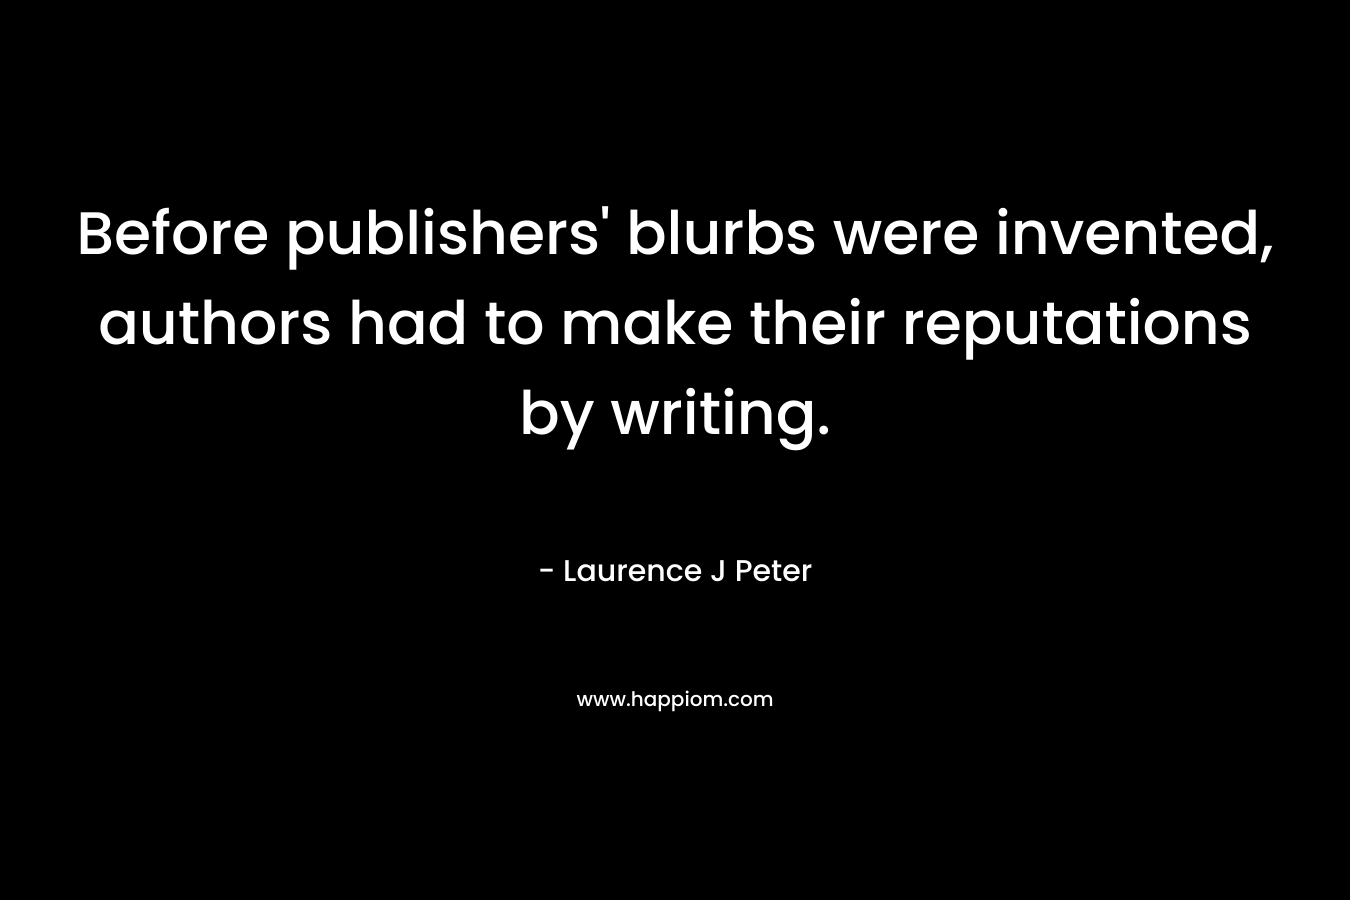 Before publishers’ blurbs were invented, authors had to make their reputations by writing. – Laurence J Peter